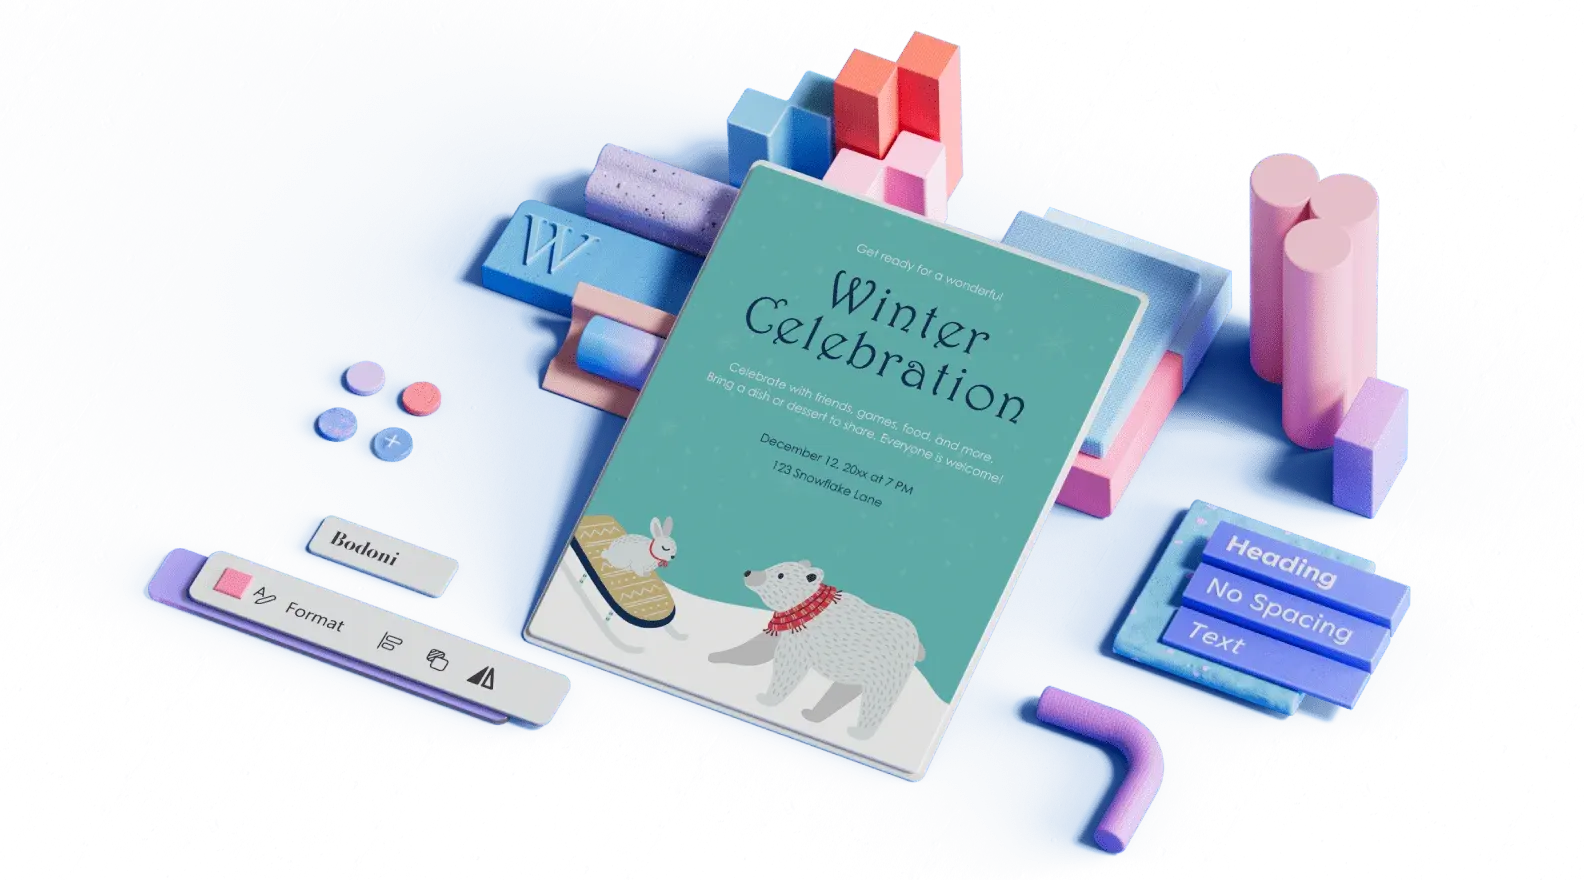 Winter celebration announcement template surrounded by 3D illustrated design elements